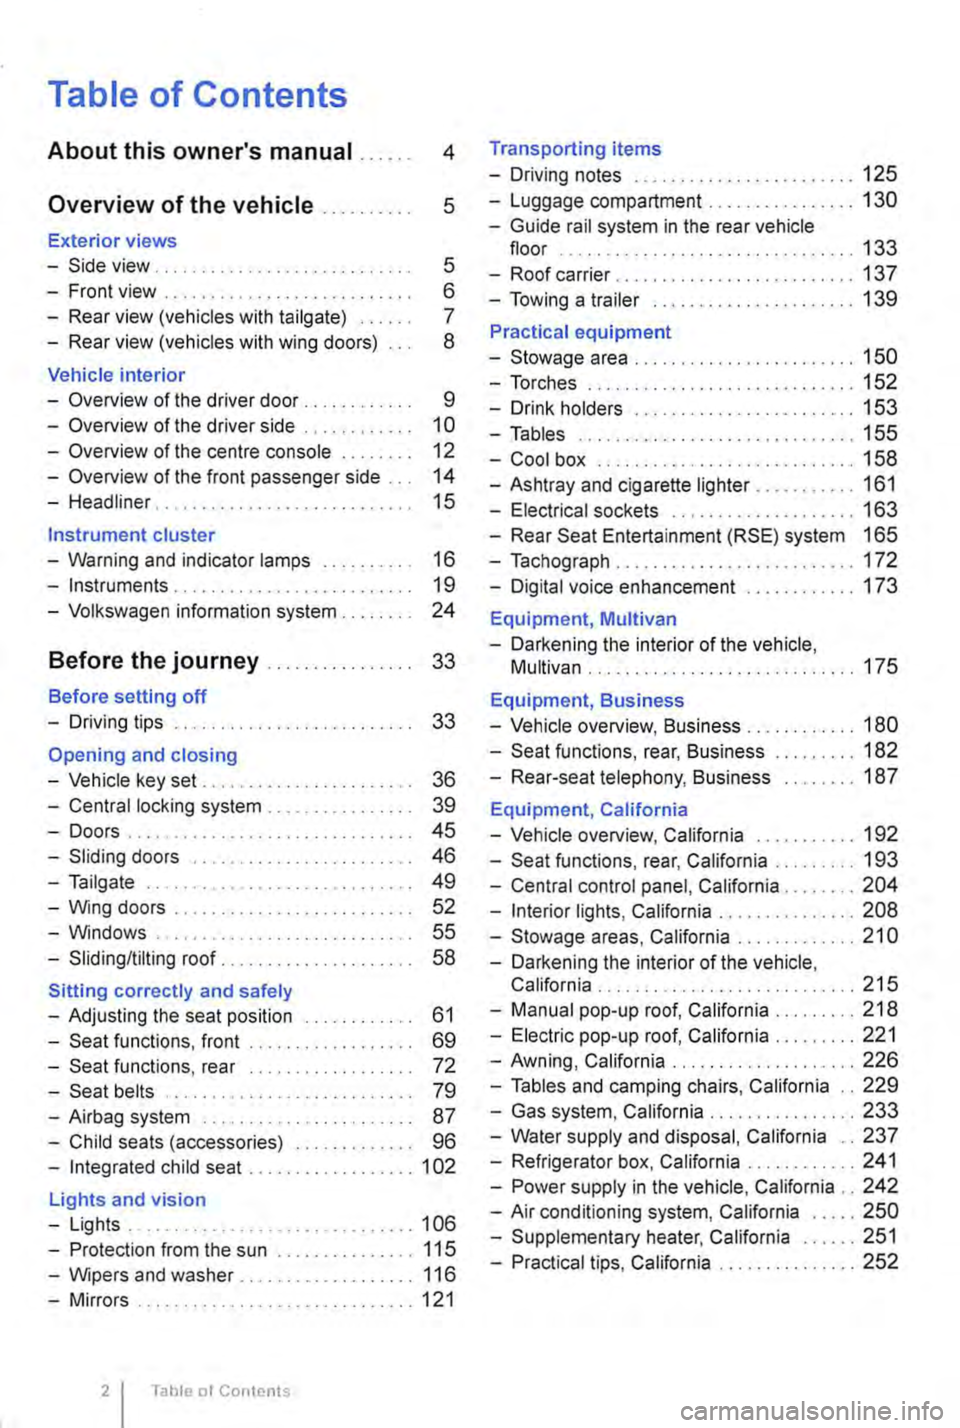 VOLKSWAGEN TRANSPORTER 2014  Owners Manual Table of Contents 
About this owners manual . . . . . . 4 
Overview of the vehicle . . . . . . . . . . 5 
Exterior views 
-Side view . . . . . . . . . . . . . . . . . . . . . . . . . . . . 5 
-Front 